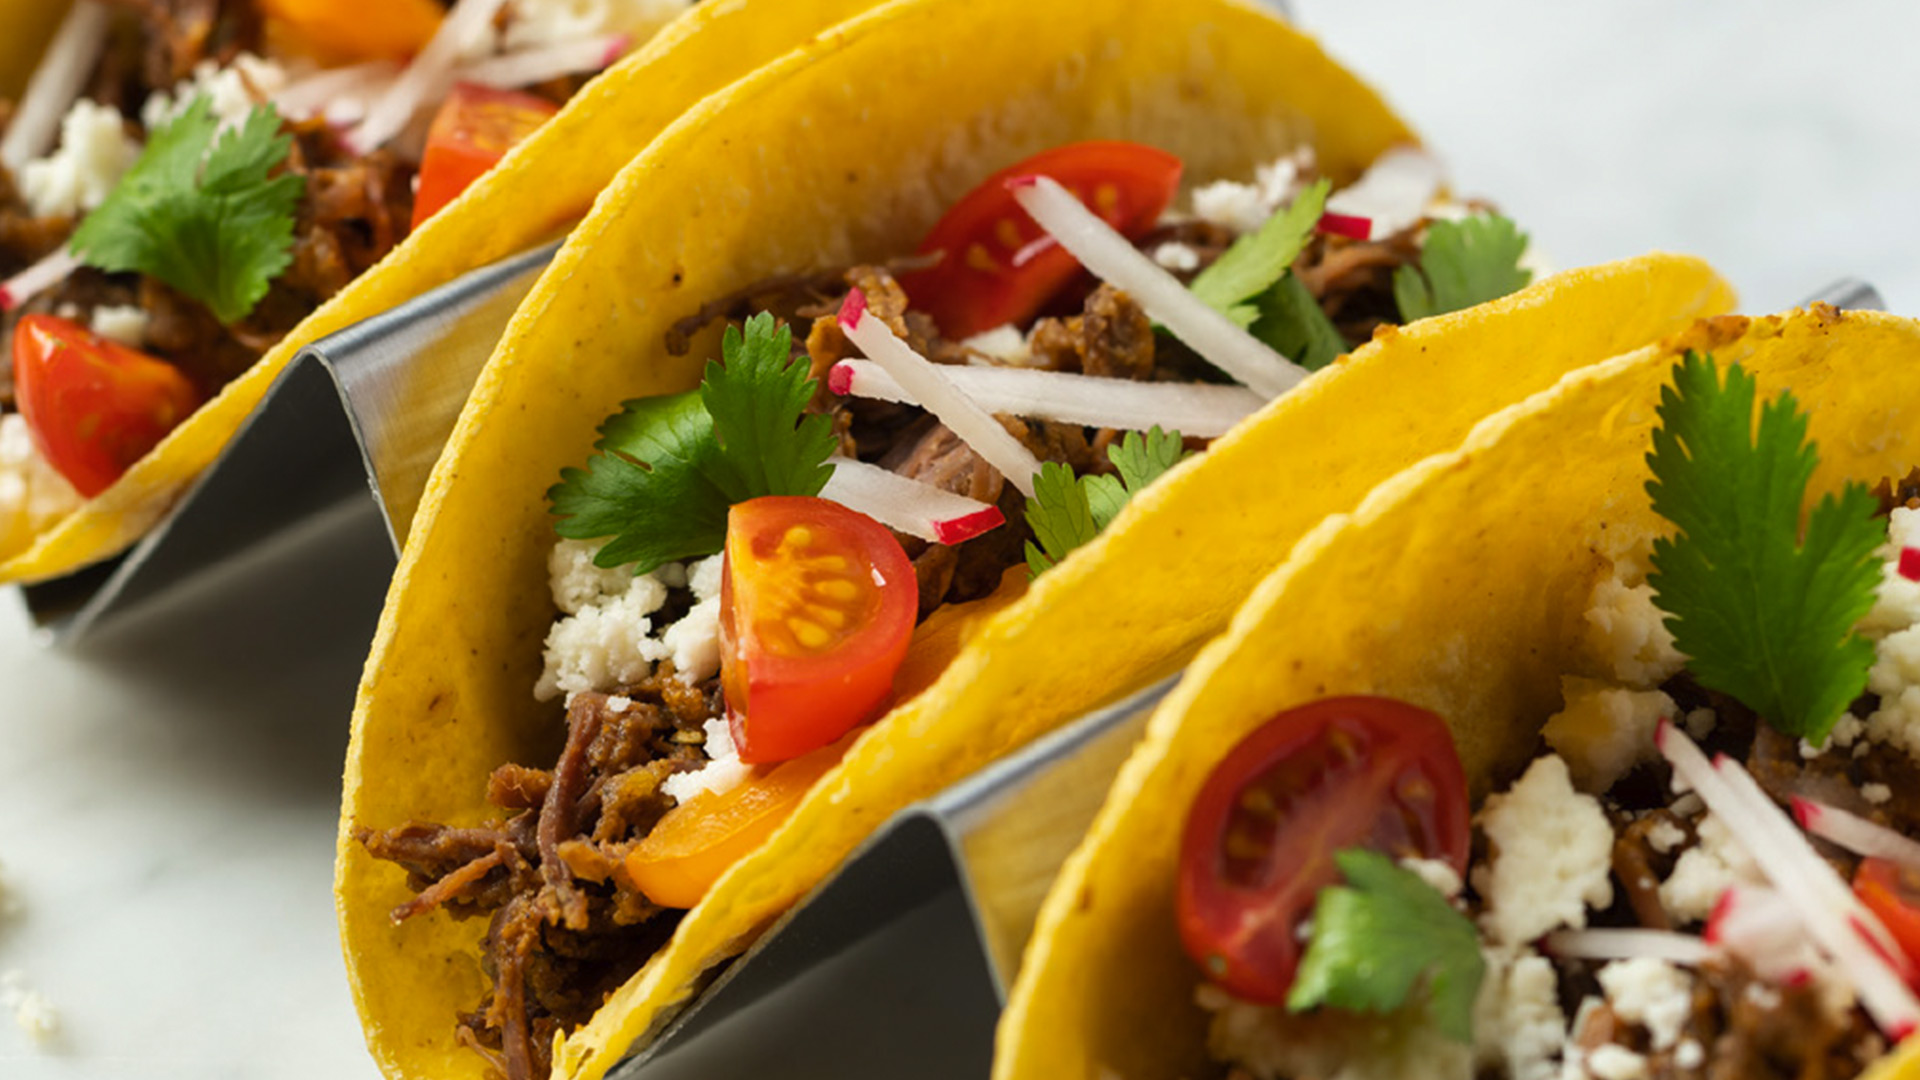 Braised Beef Short Rib Barbacoa for Tacosarticle featured image thumbnail.